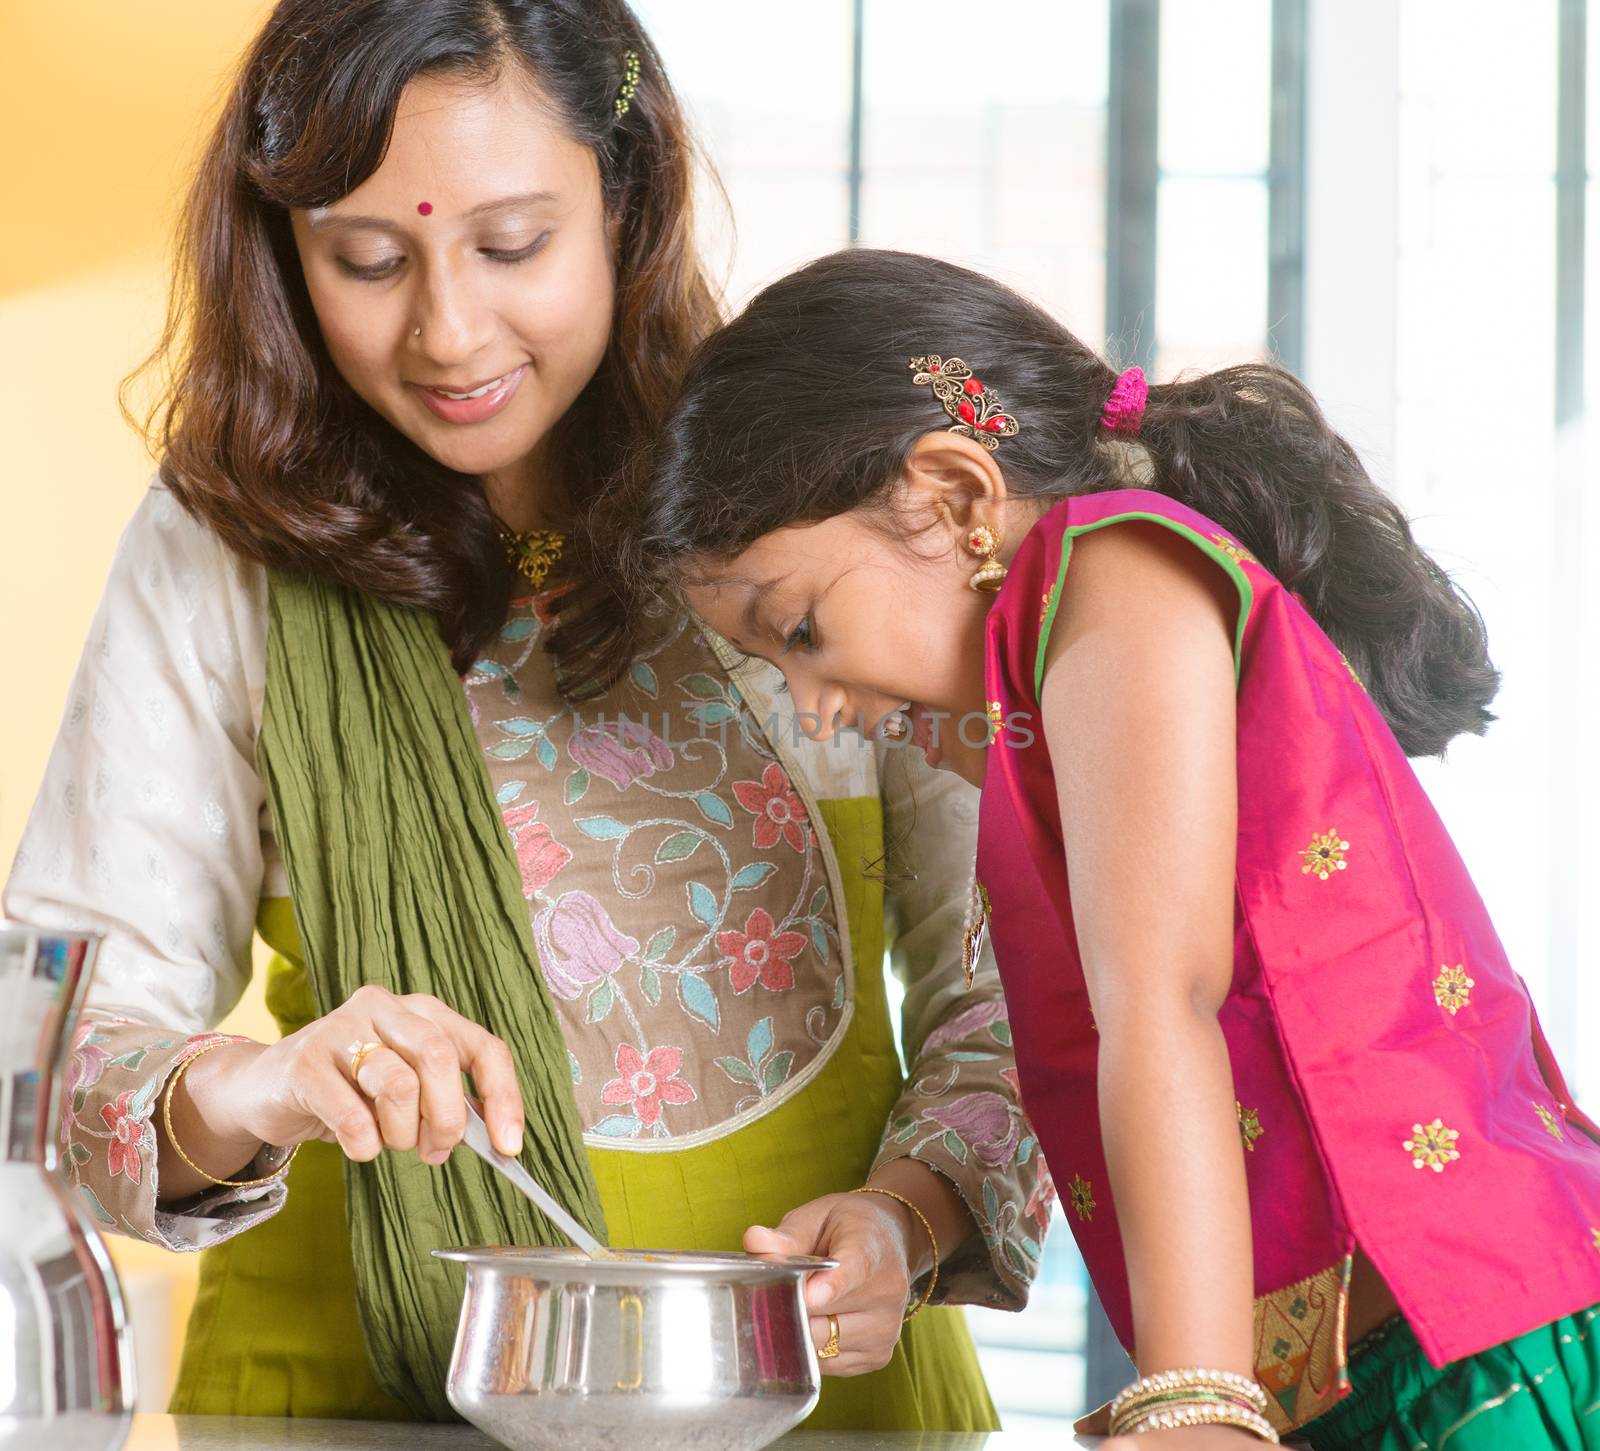 Asian family cooking food together at home. Indian mother and child preparing meal in kitchen. Traditional India people with sari clothing.